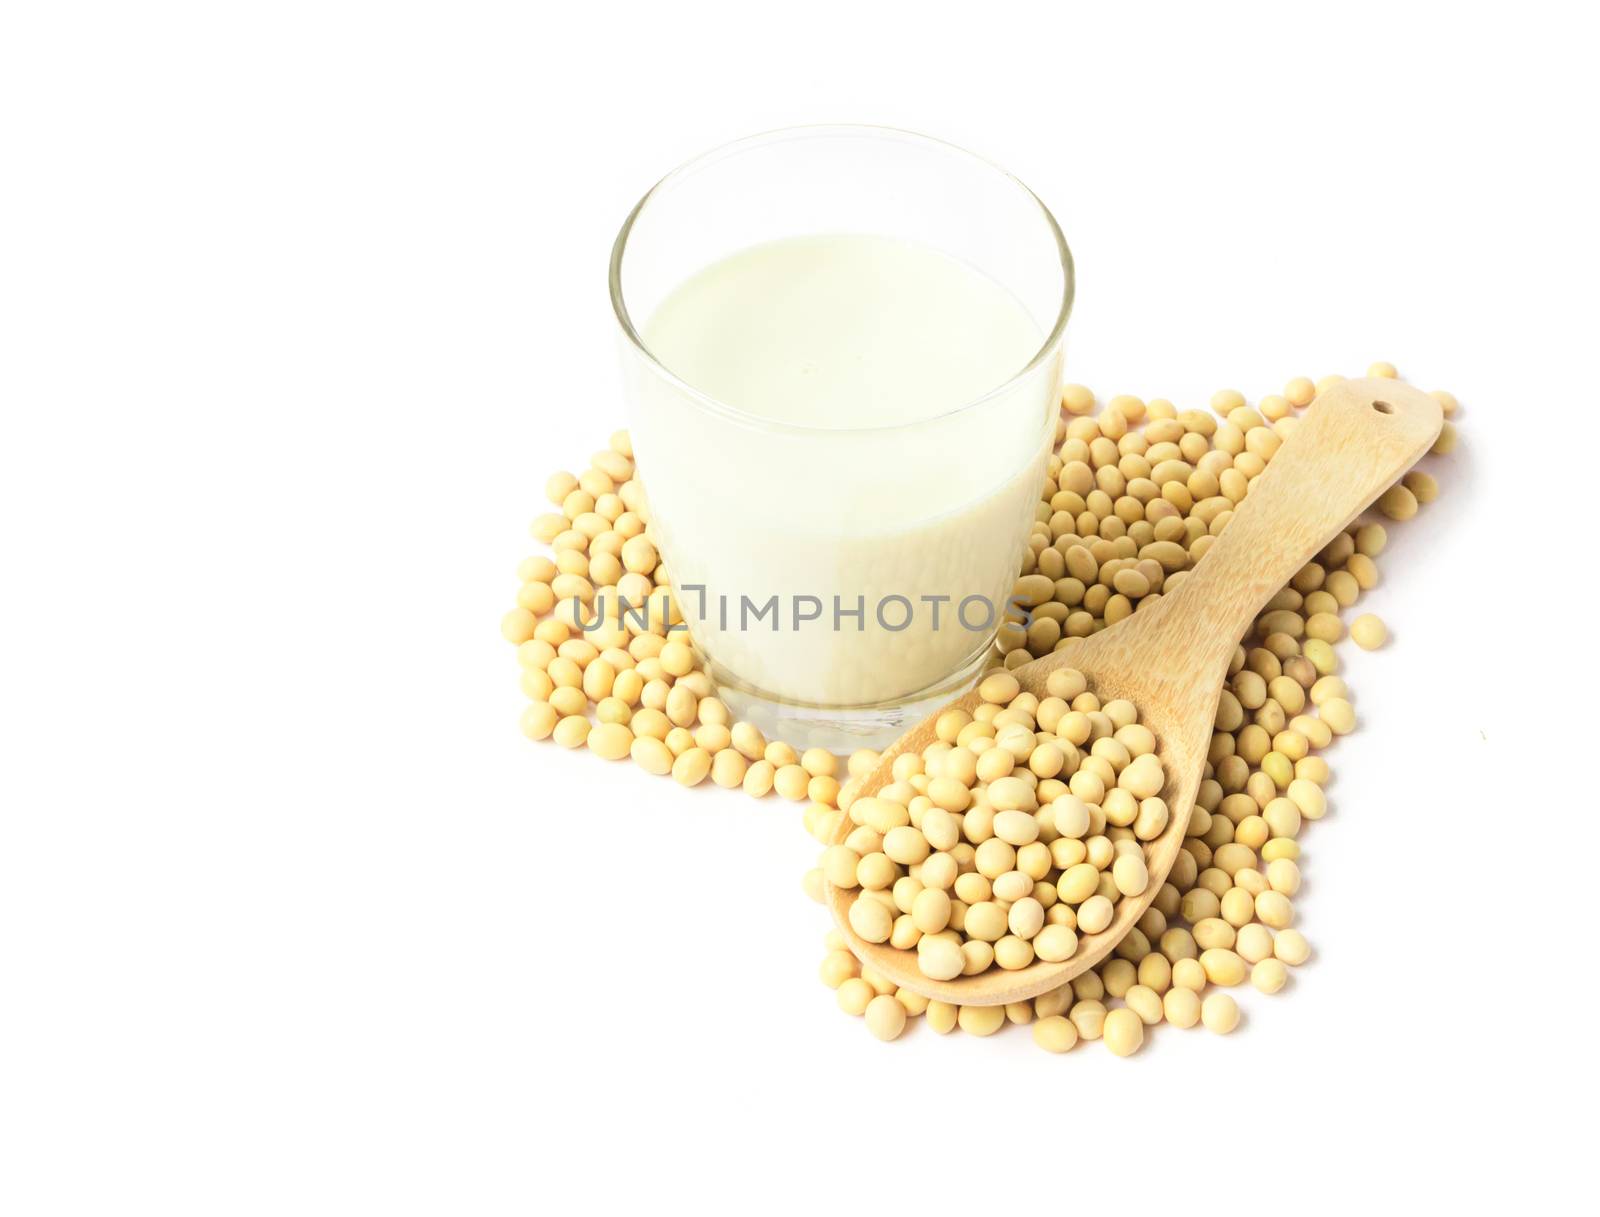 Glass soy milk and soy beans with heart shape on white backgroun by pt.pongsak@gmail.com